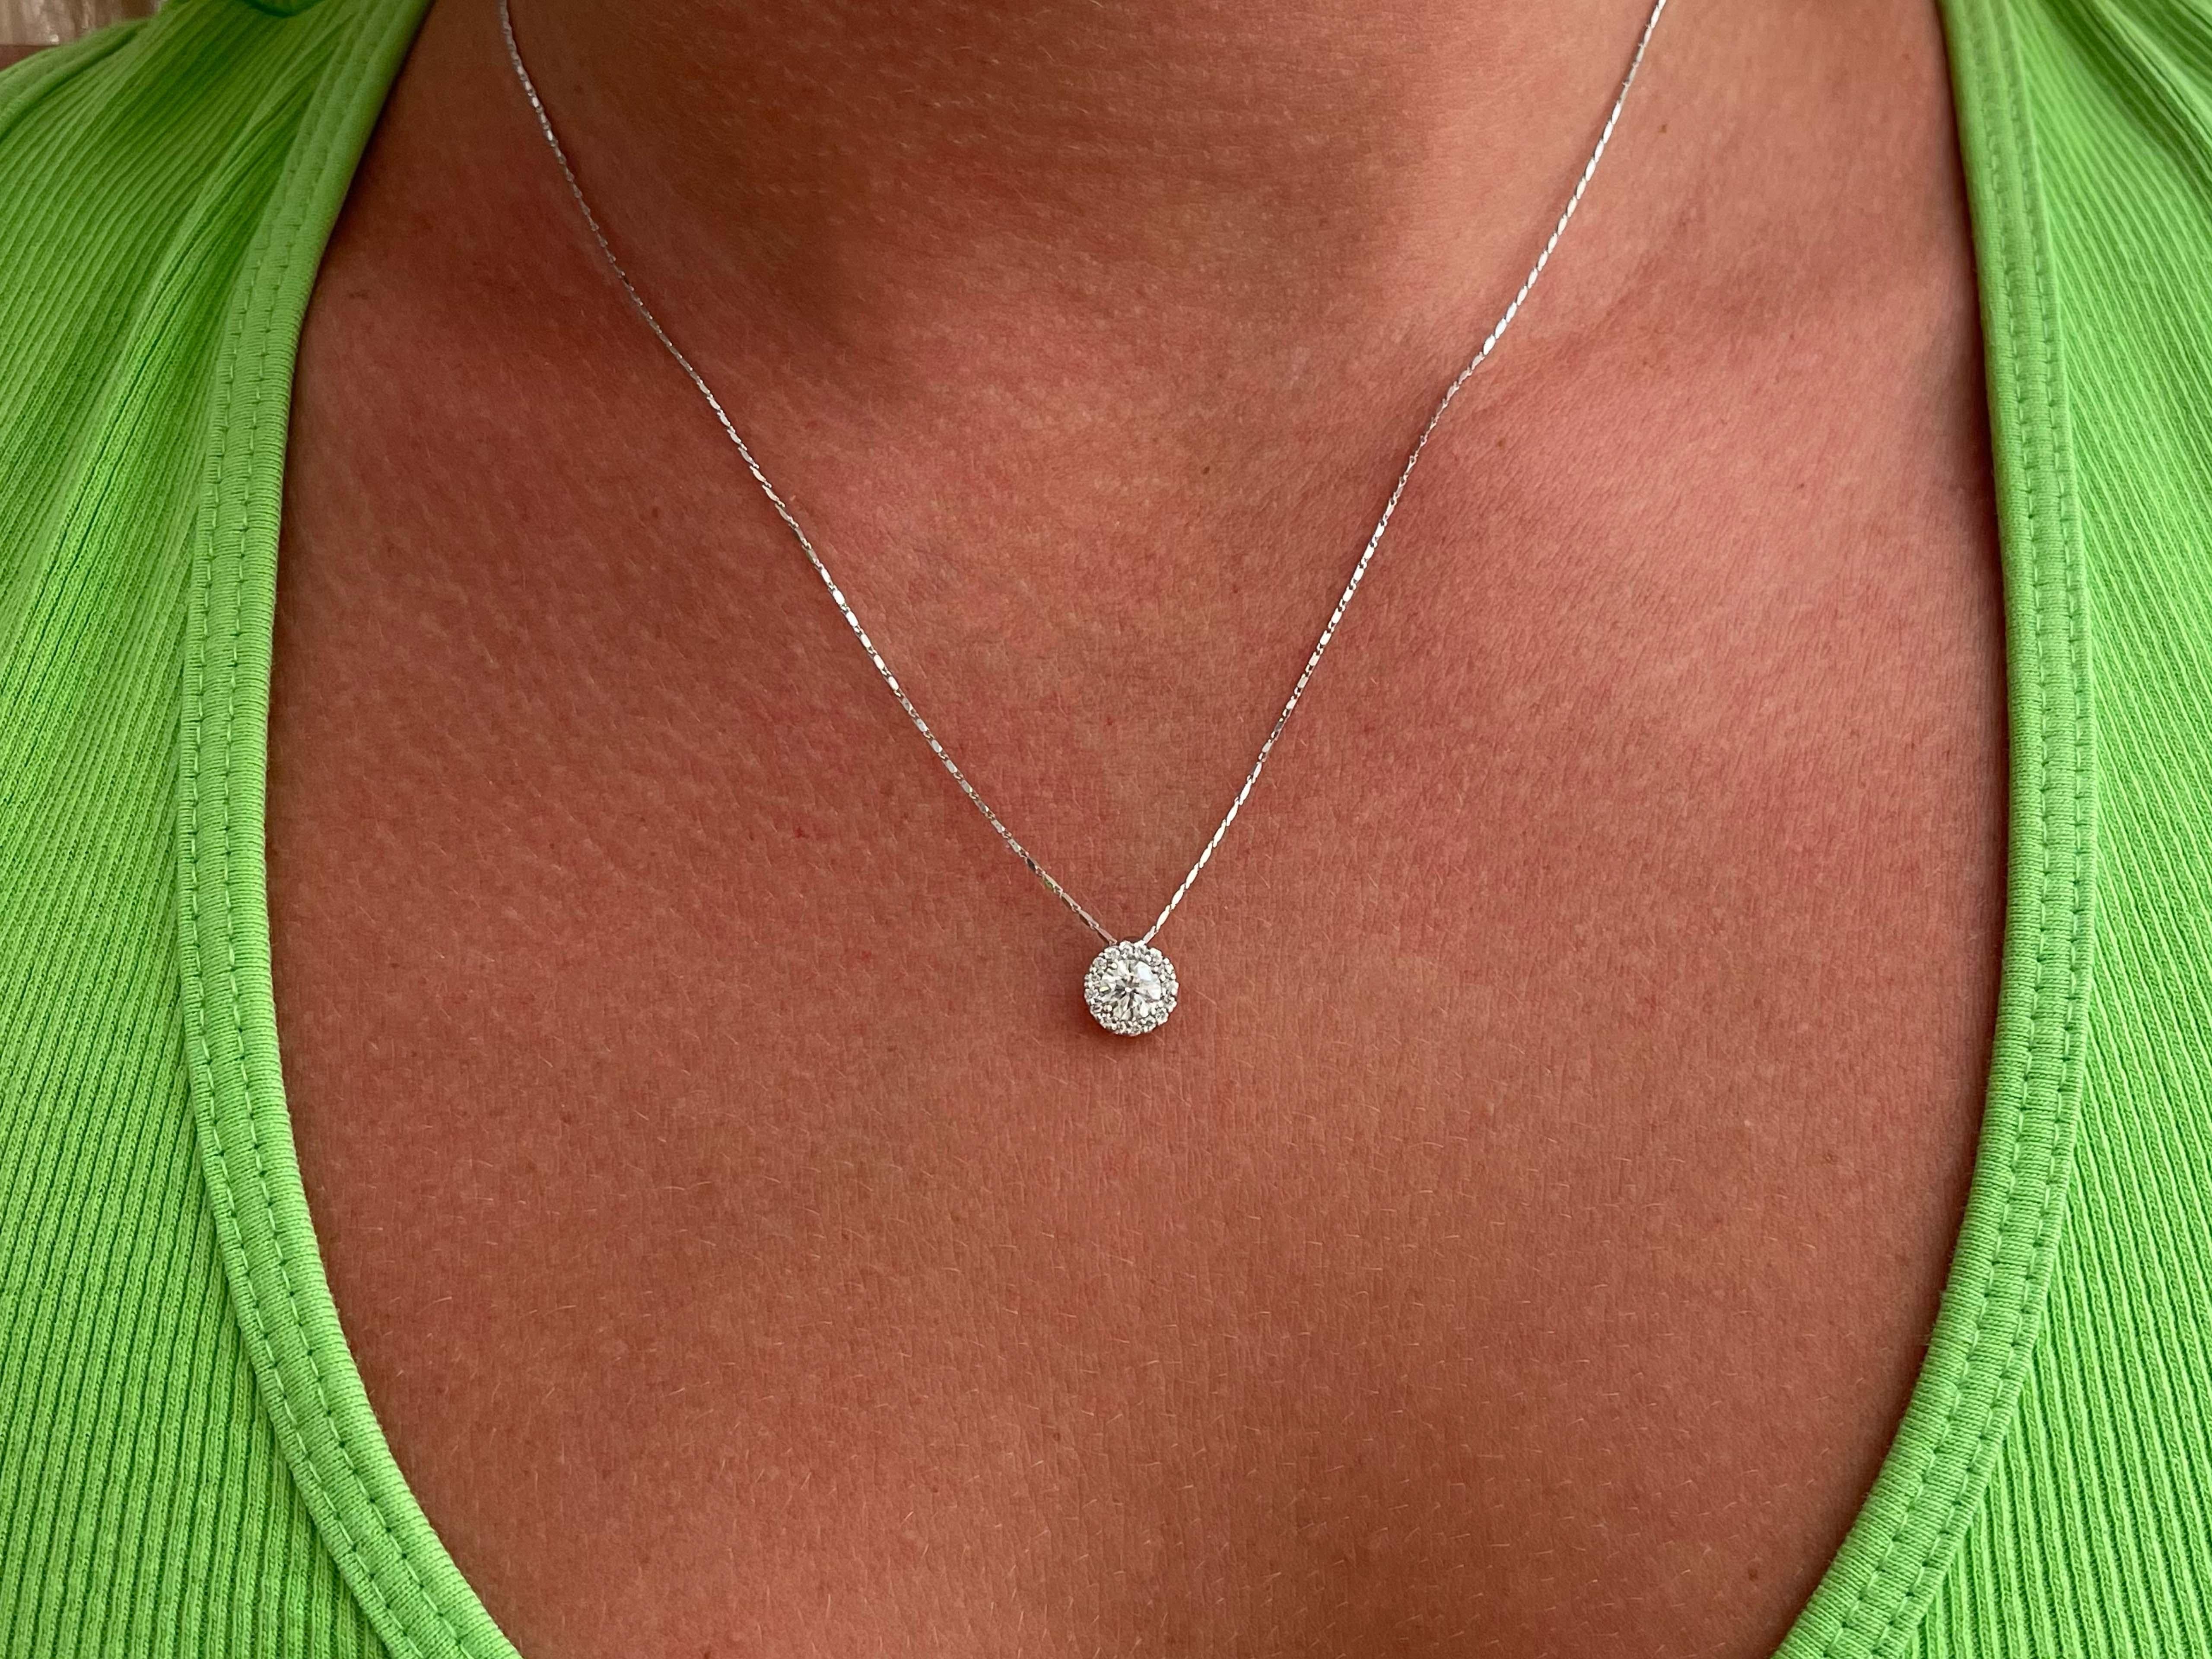 This gorgeous necklace features 17 round brilliant cut diamonds giving never ending sparkle in all angles. The center diamond is G in color and SI2 in clarity and the additional diamonds are G in color VS2-SI1 in clarity. This necklace is